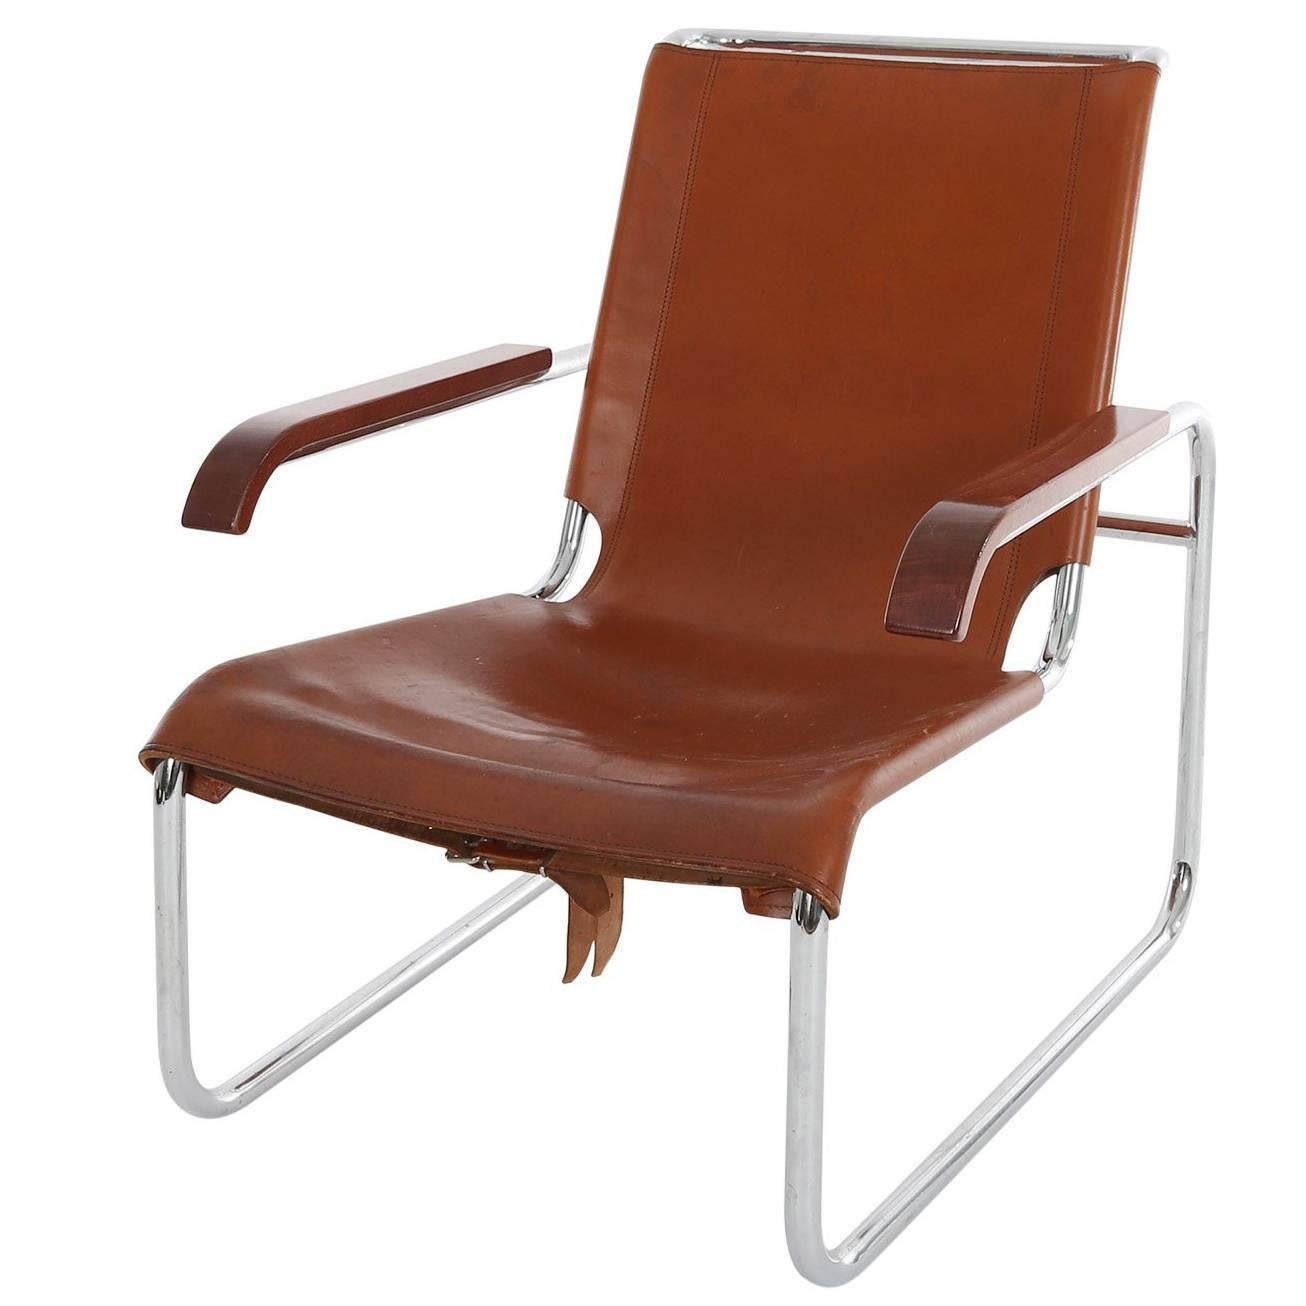 Marcel Breuer S35 Lounge Chair 1928 for Thonet